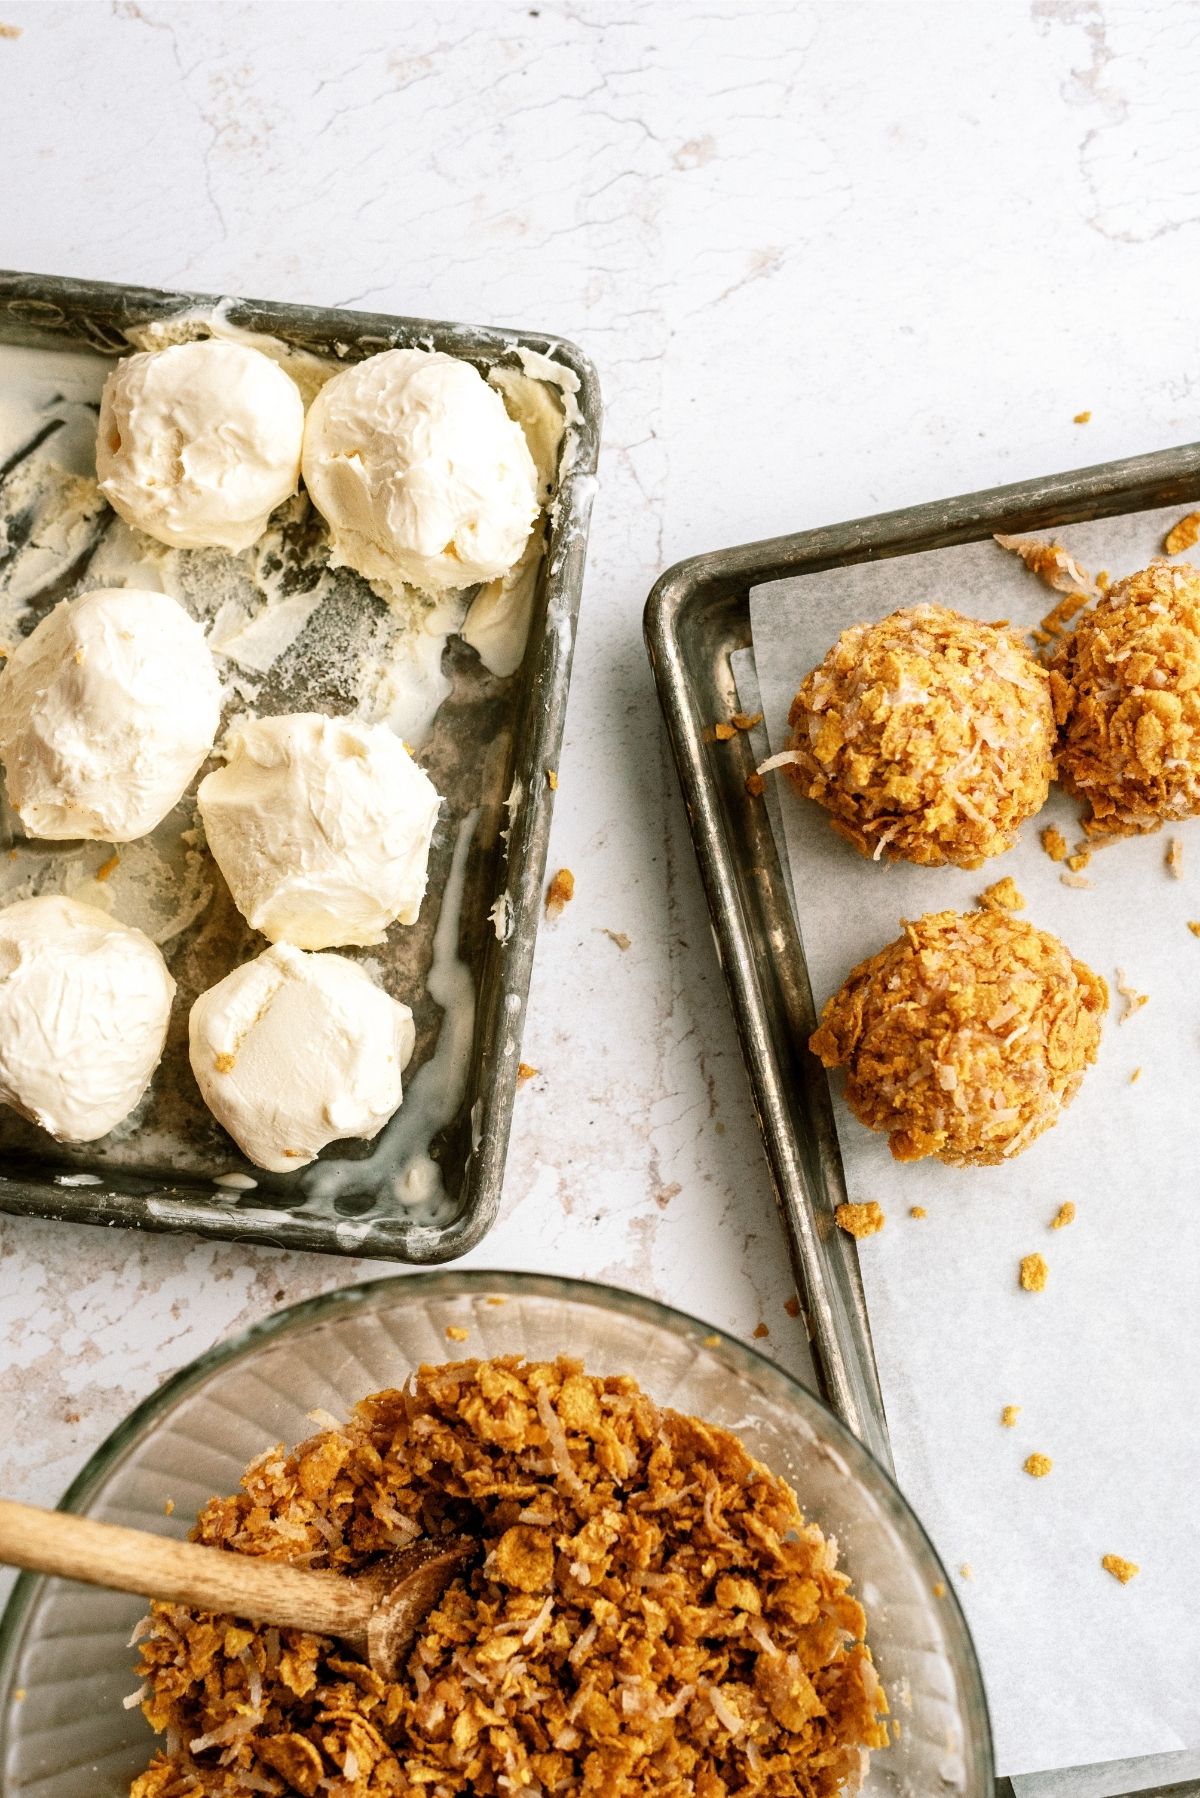 Ice Cream Ball and Coconut Mixture on Sheet Pan